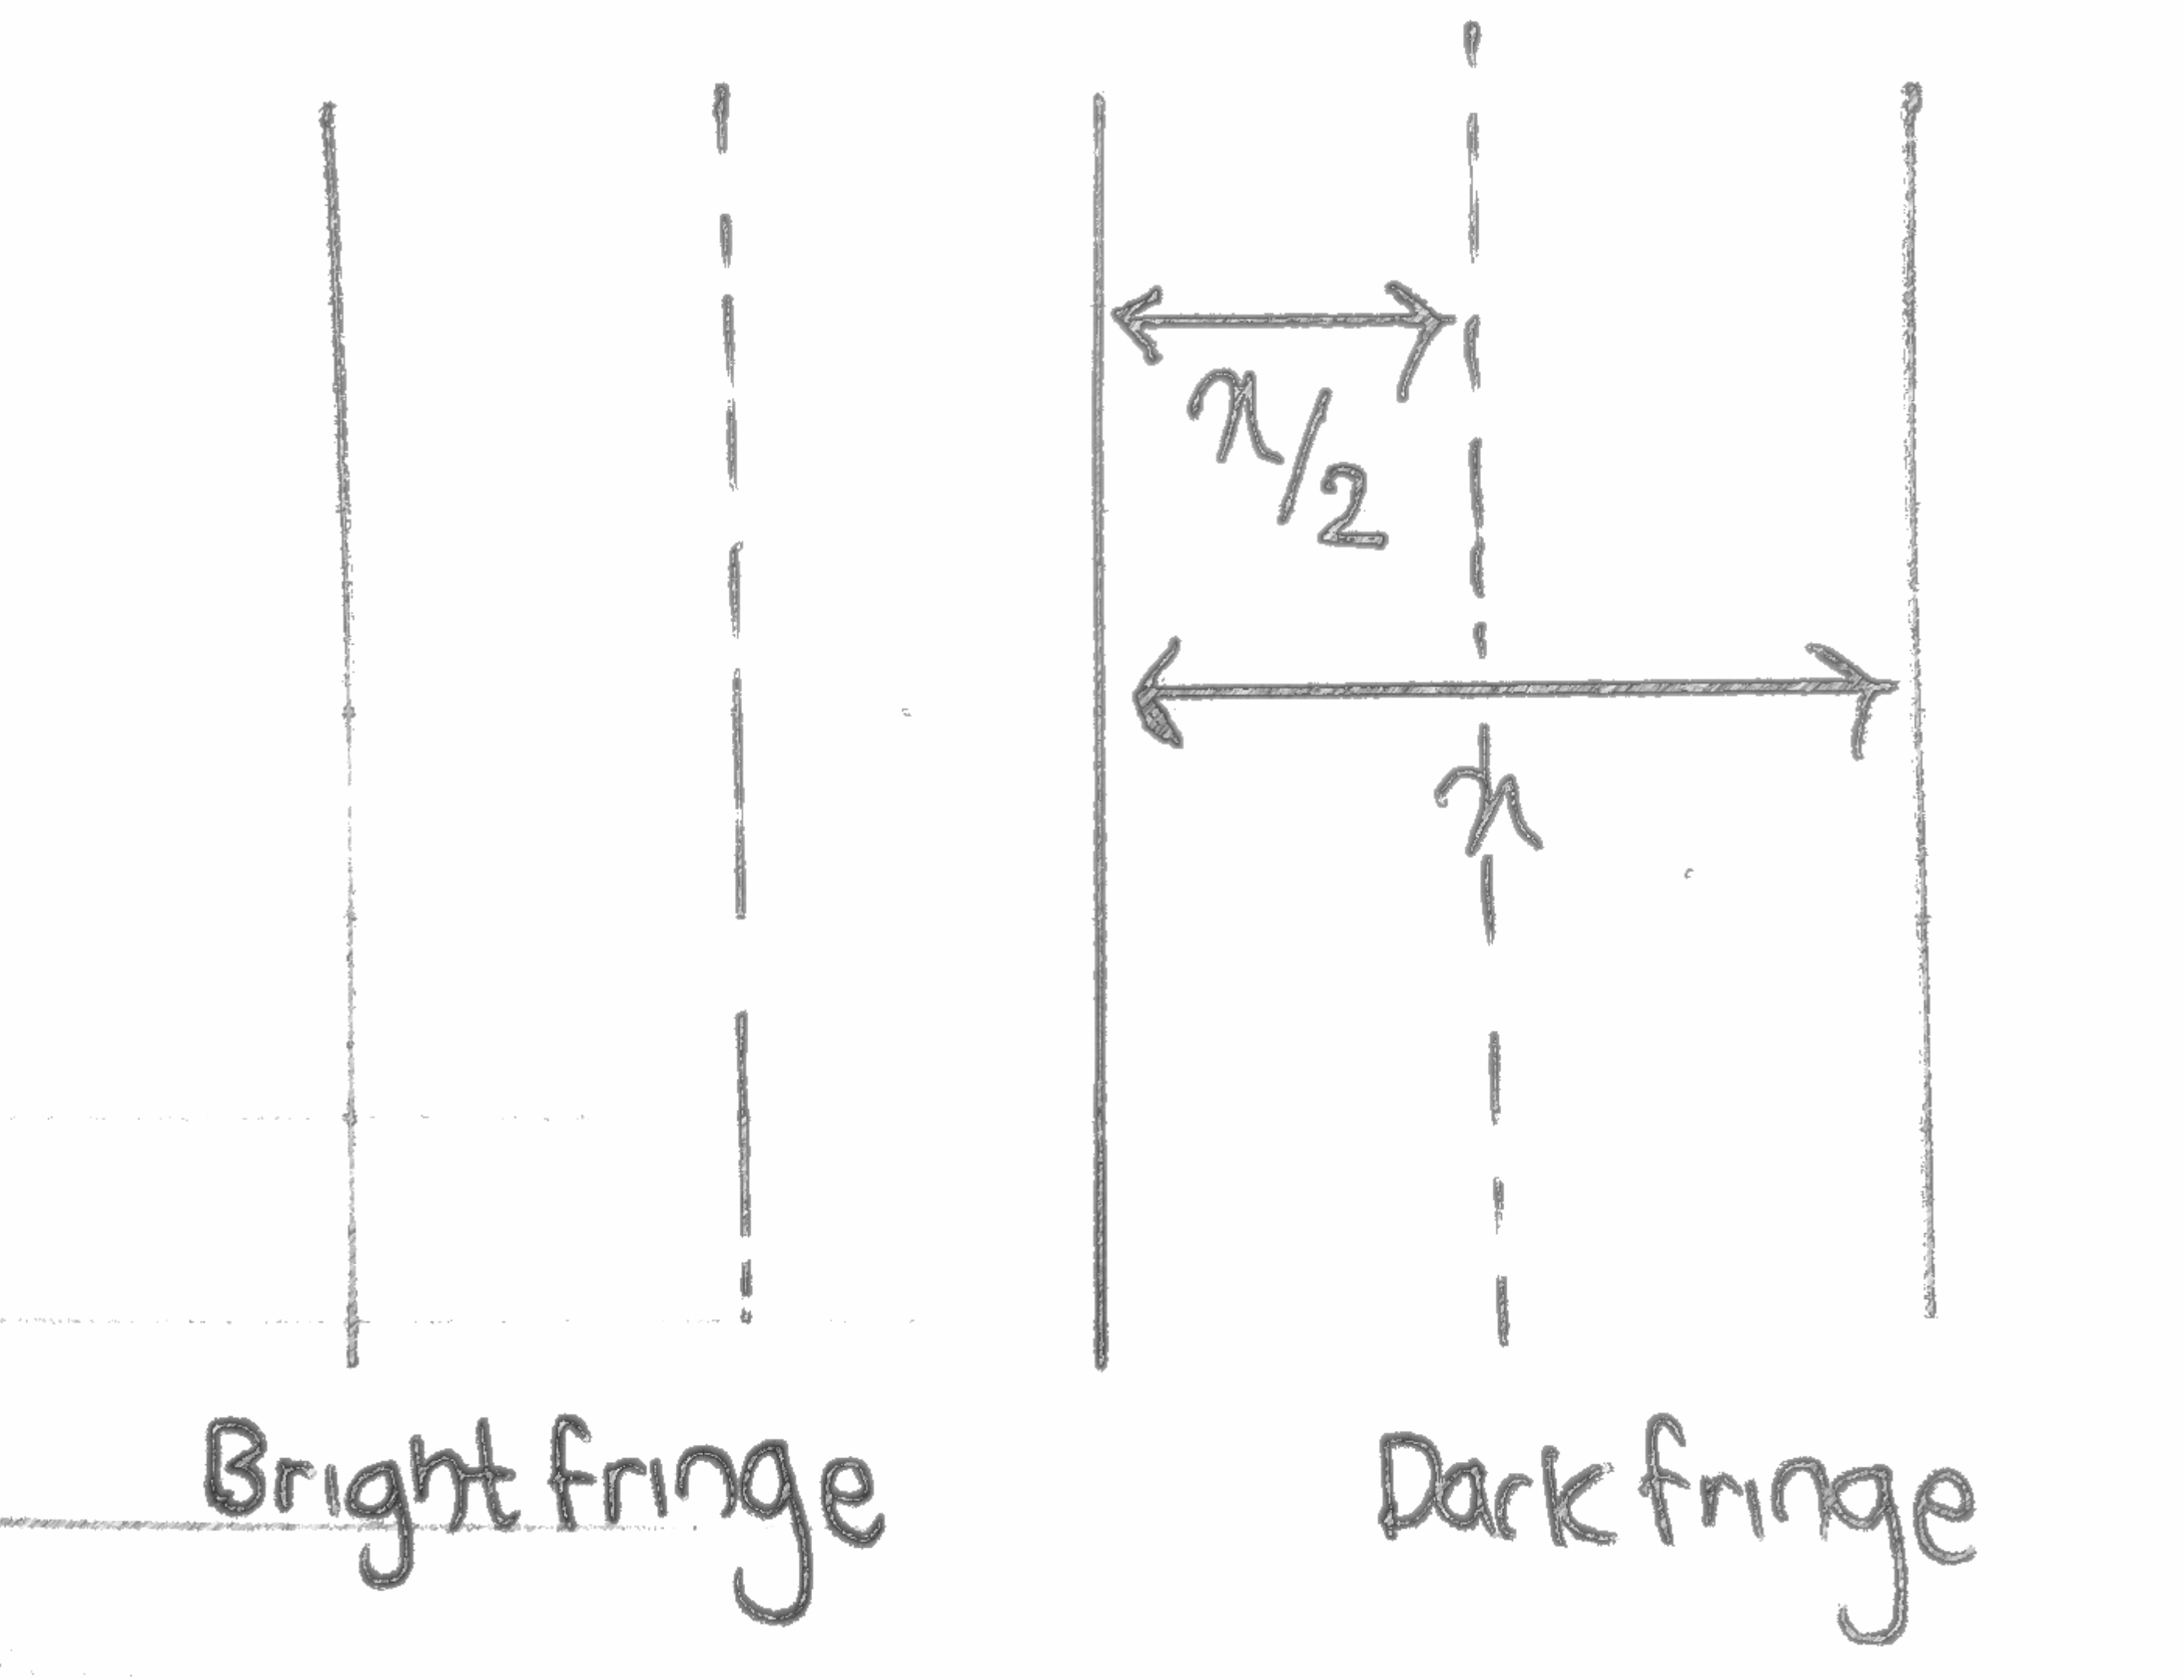 How to calculate the distance between two fringes and half a fringe in the young double slit experiment